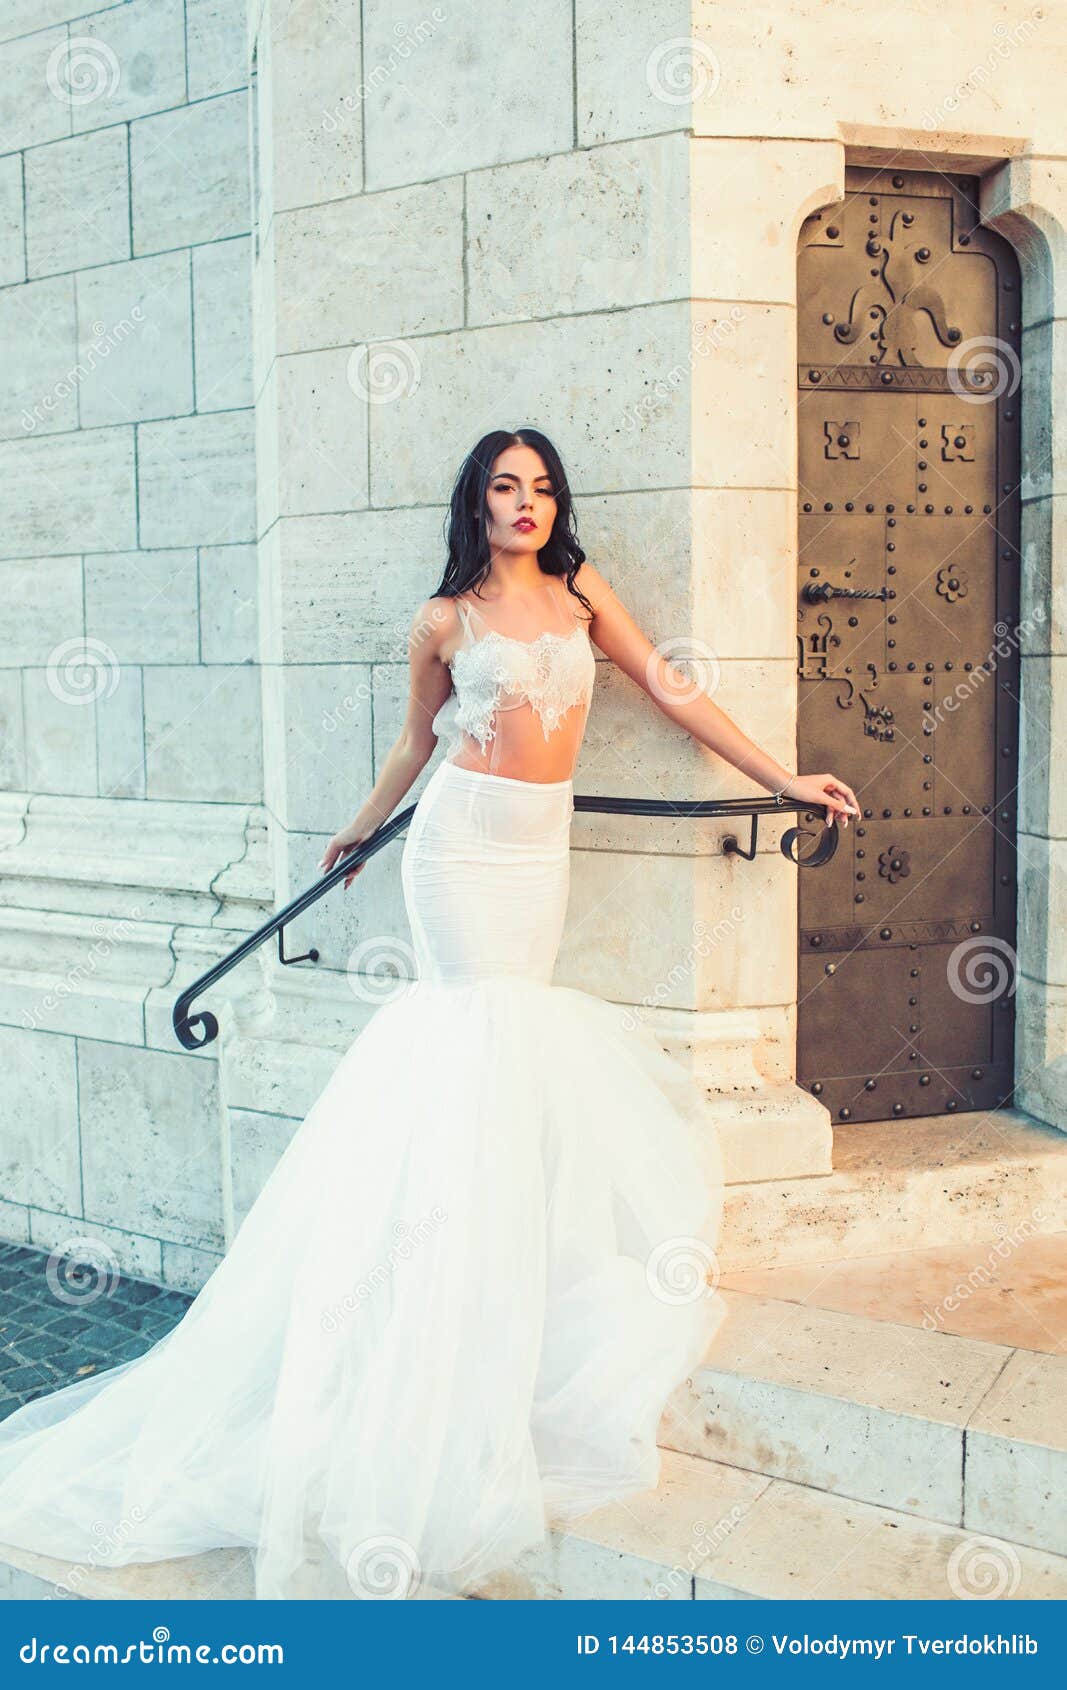 Girl in White Dress with Stylish Hair. Bride Girl at Wedding